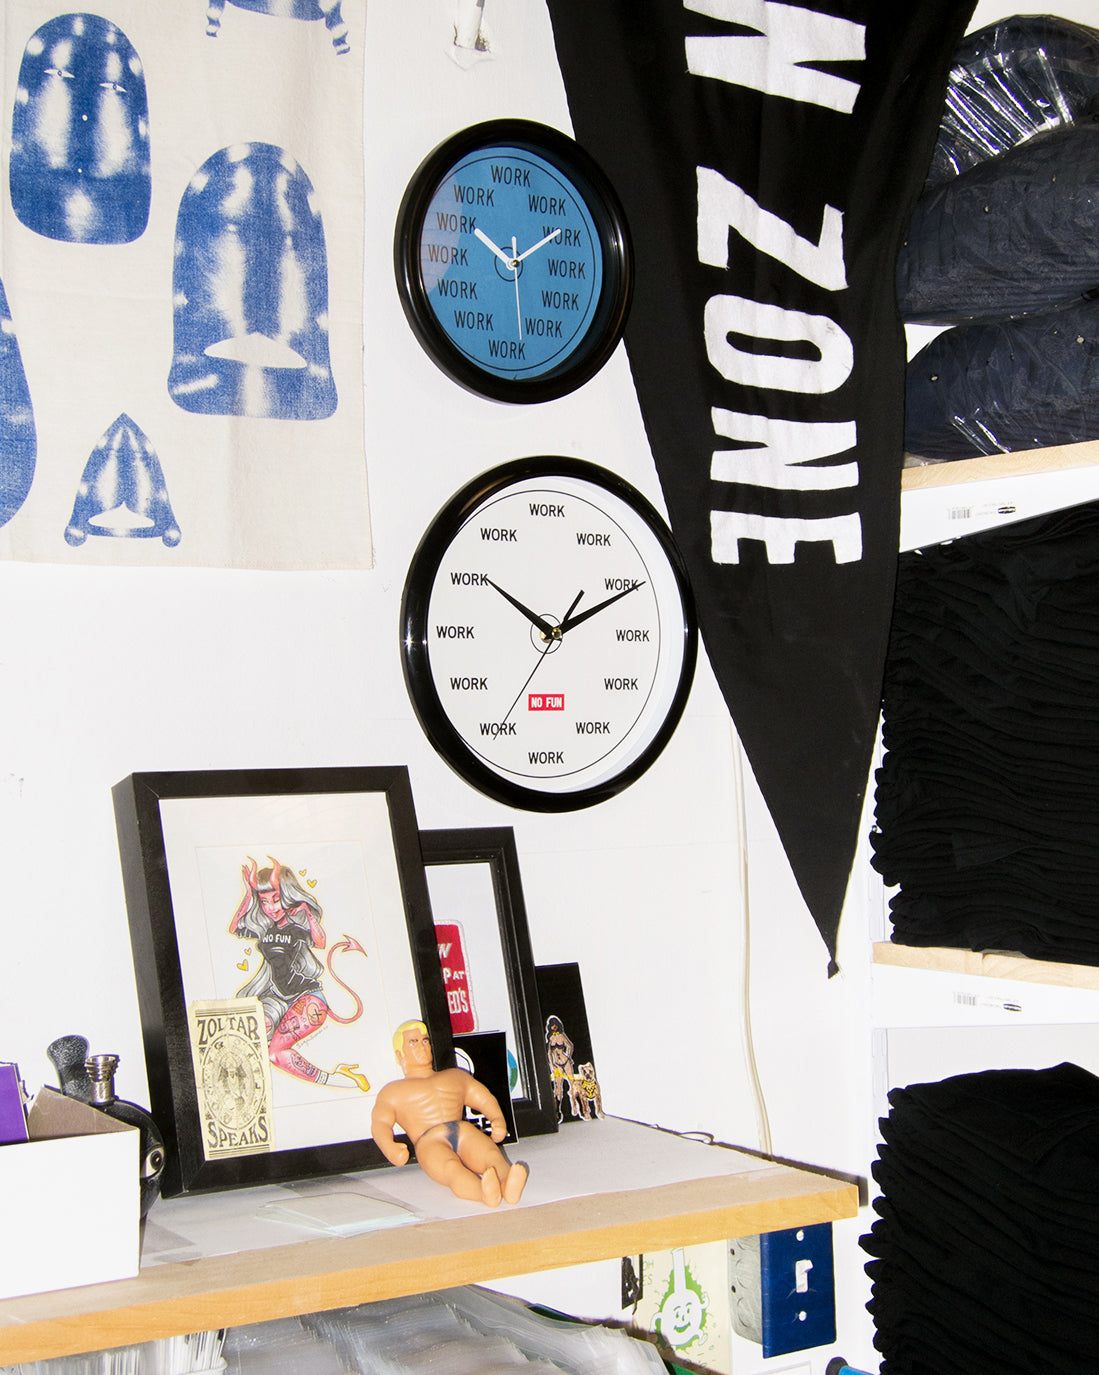 The original "WORK" studio wall clock. Wall clock with "WORK" replacing the hours/minutes on the face. Red No Fun® logo in center. Clock is photographed on a pegboard, surrounded by various framed photos, prints, and toys.